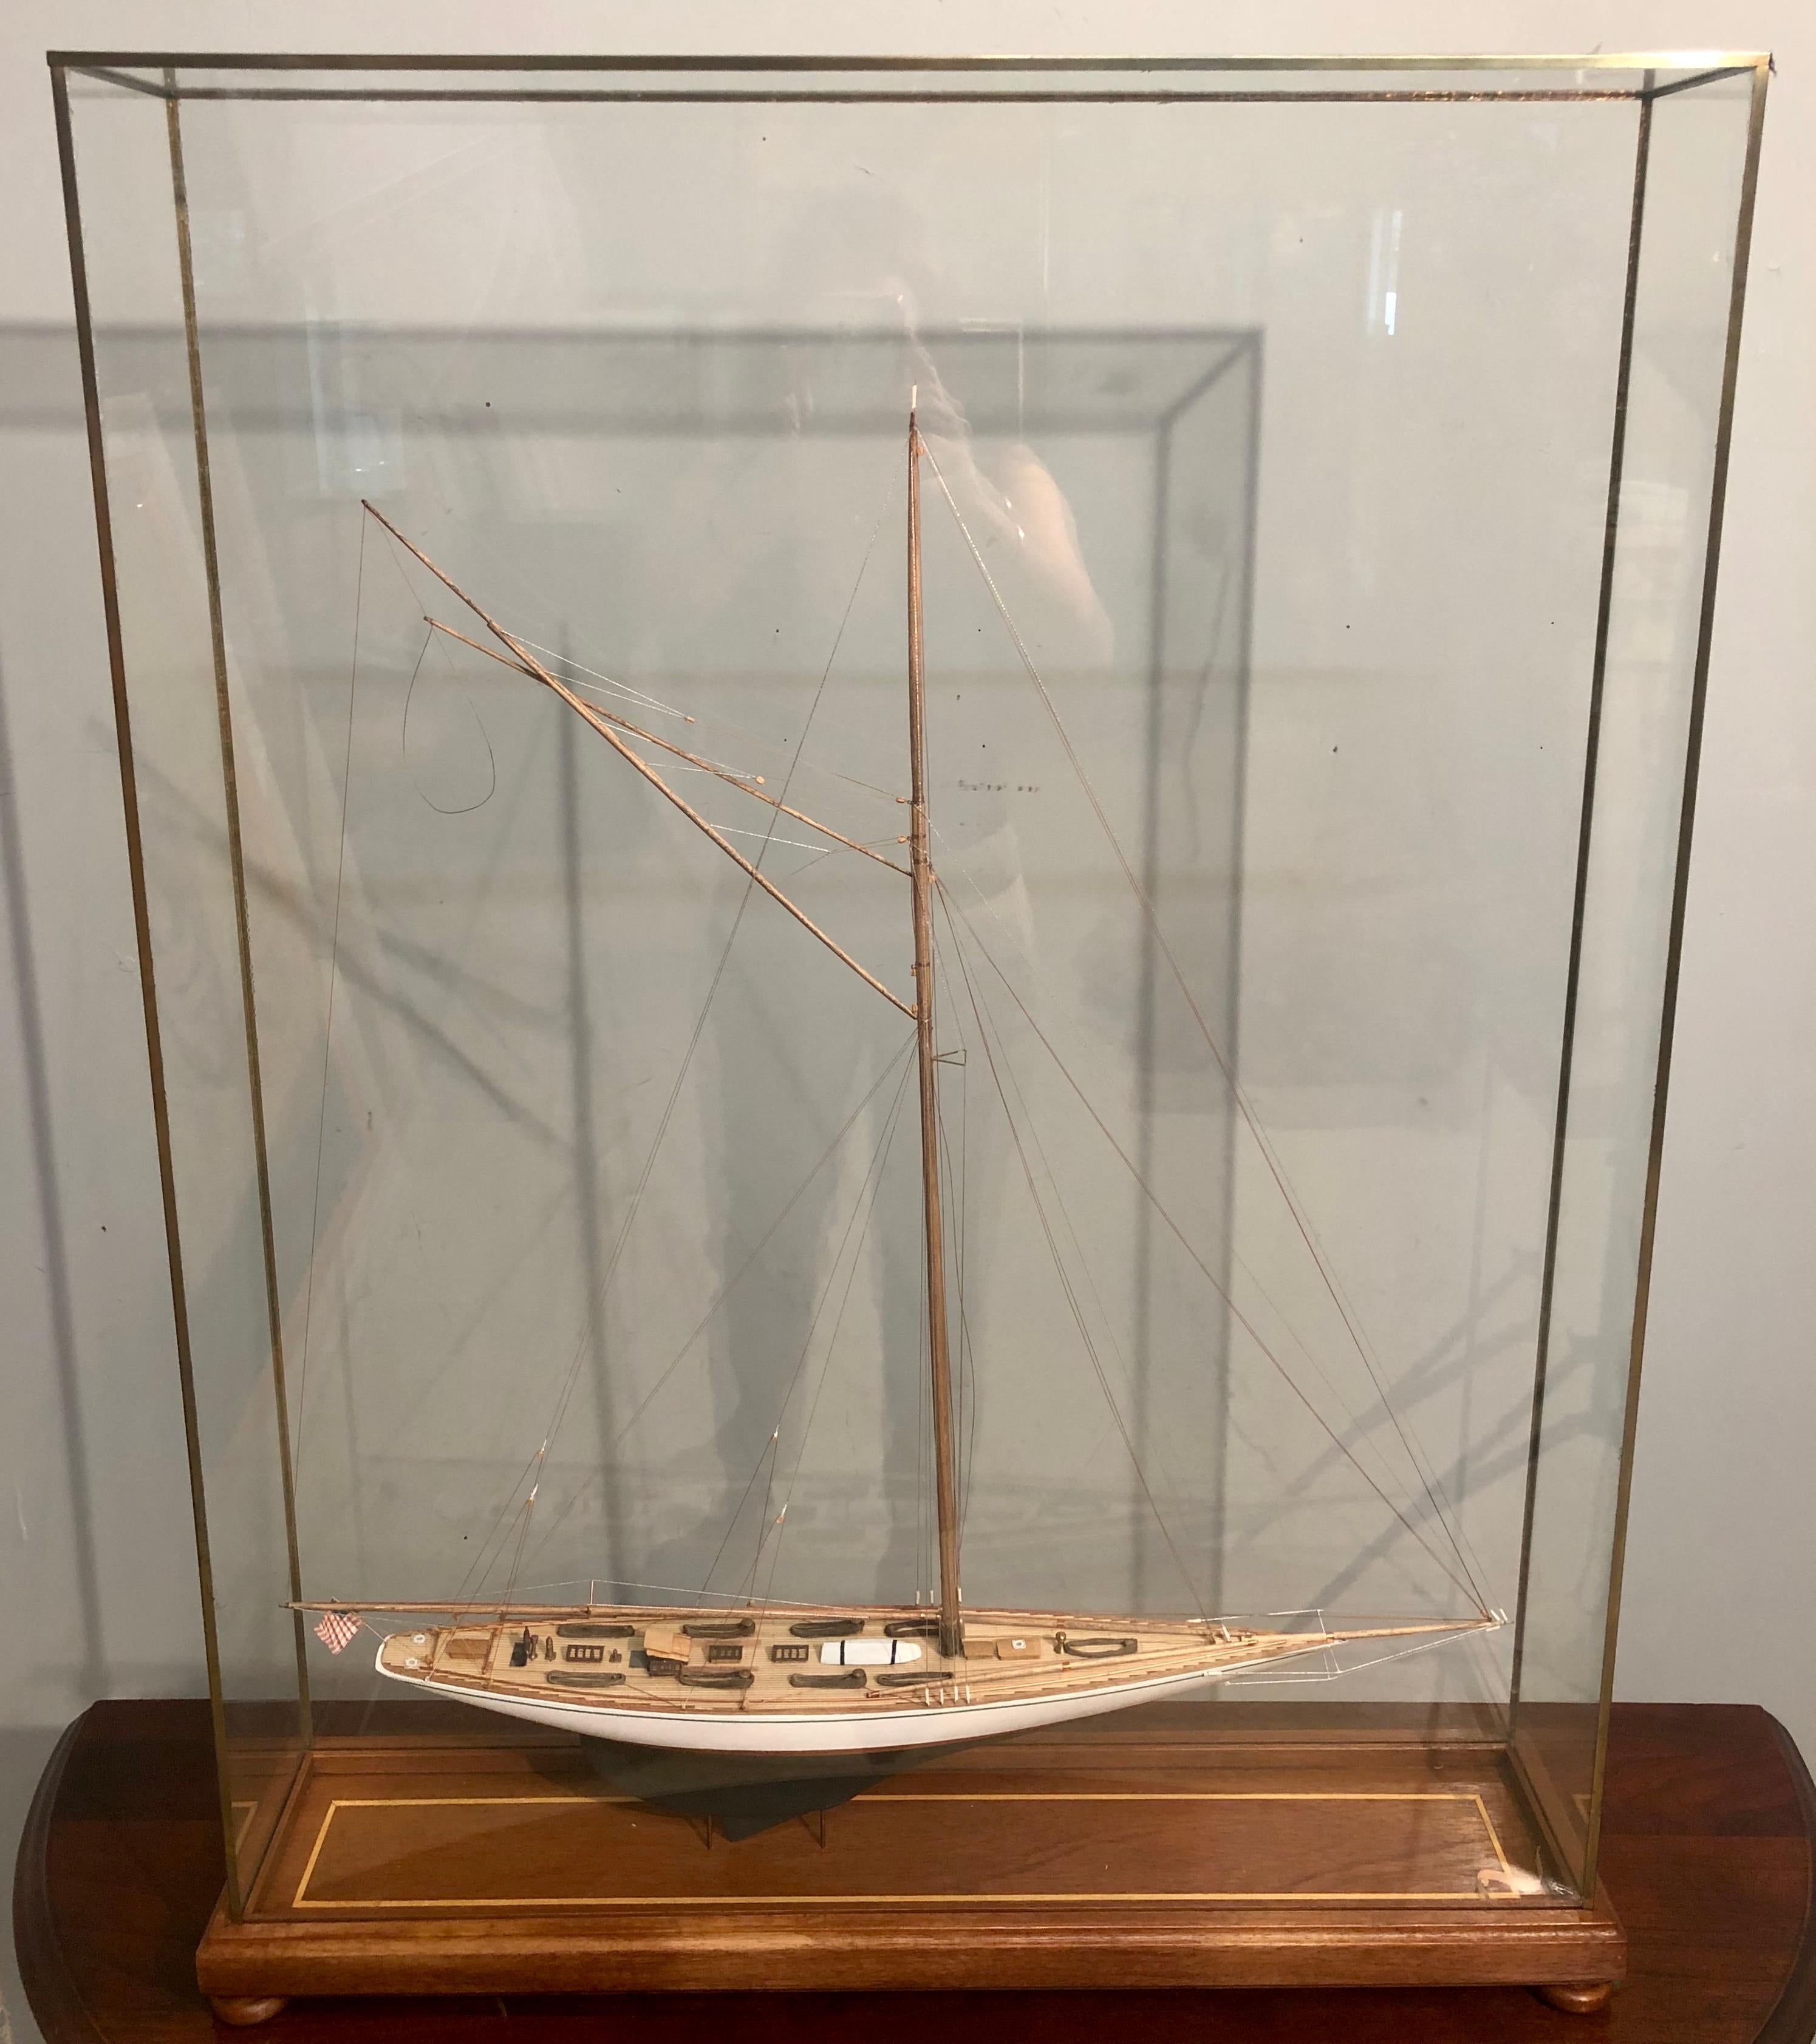 Hand modeled clipper ship in a glass and bronze case waving the American flag. A simply stunning clipper ship model leaving no detail to attention undone. A seemingly spectacular crafted ship as life like as possible in a custom all glass bronze